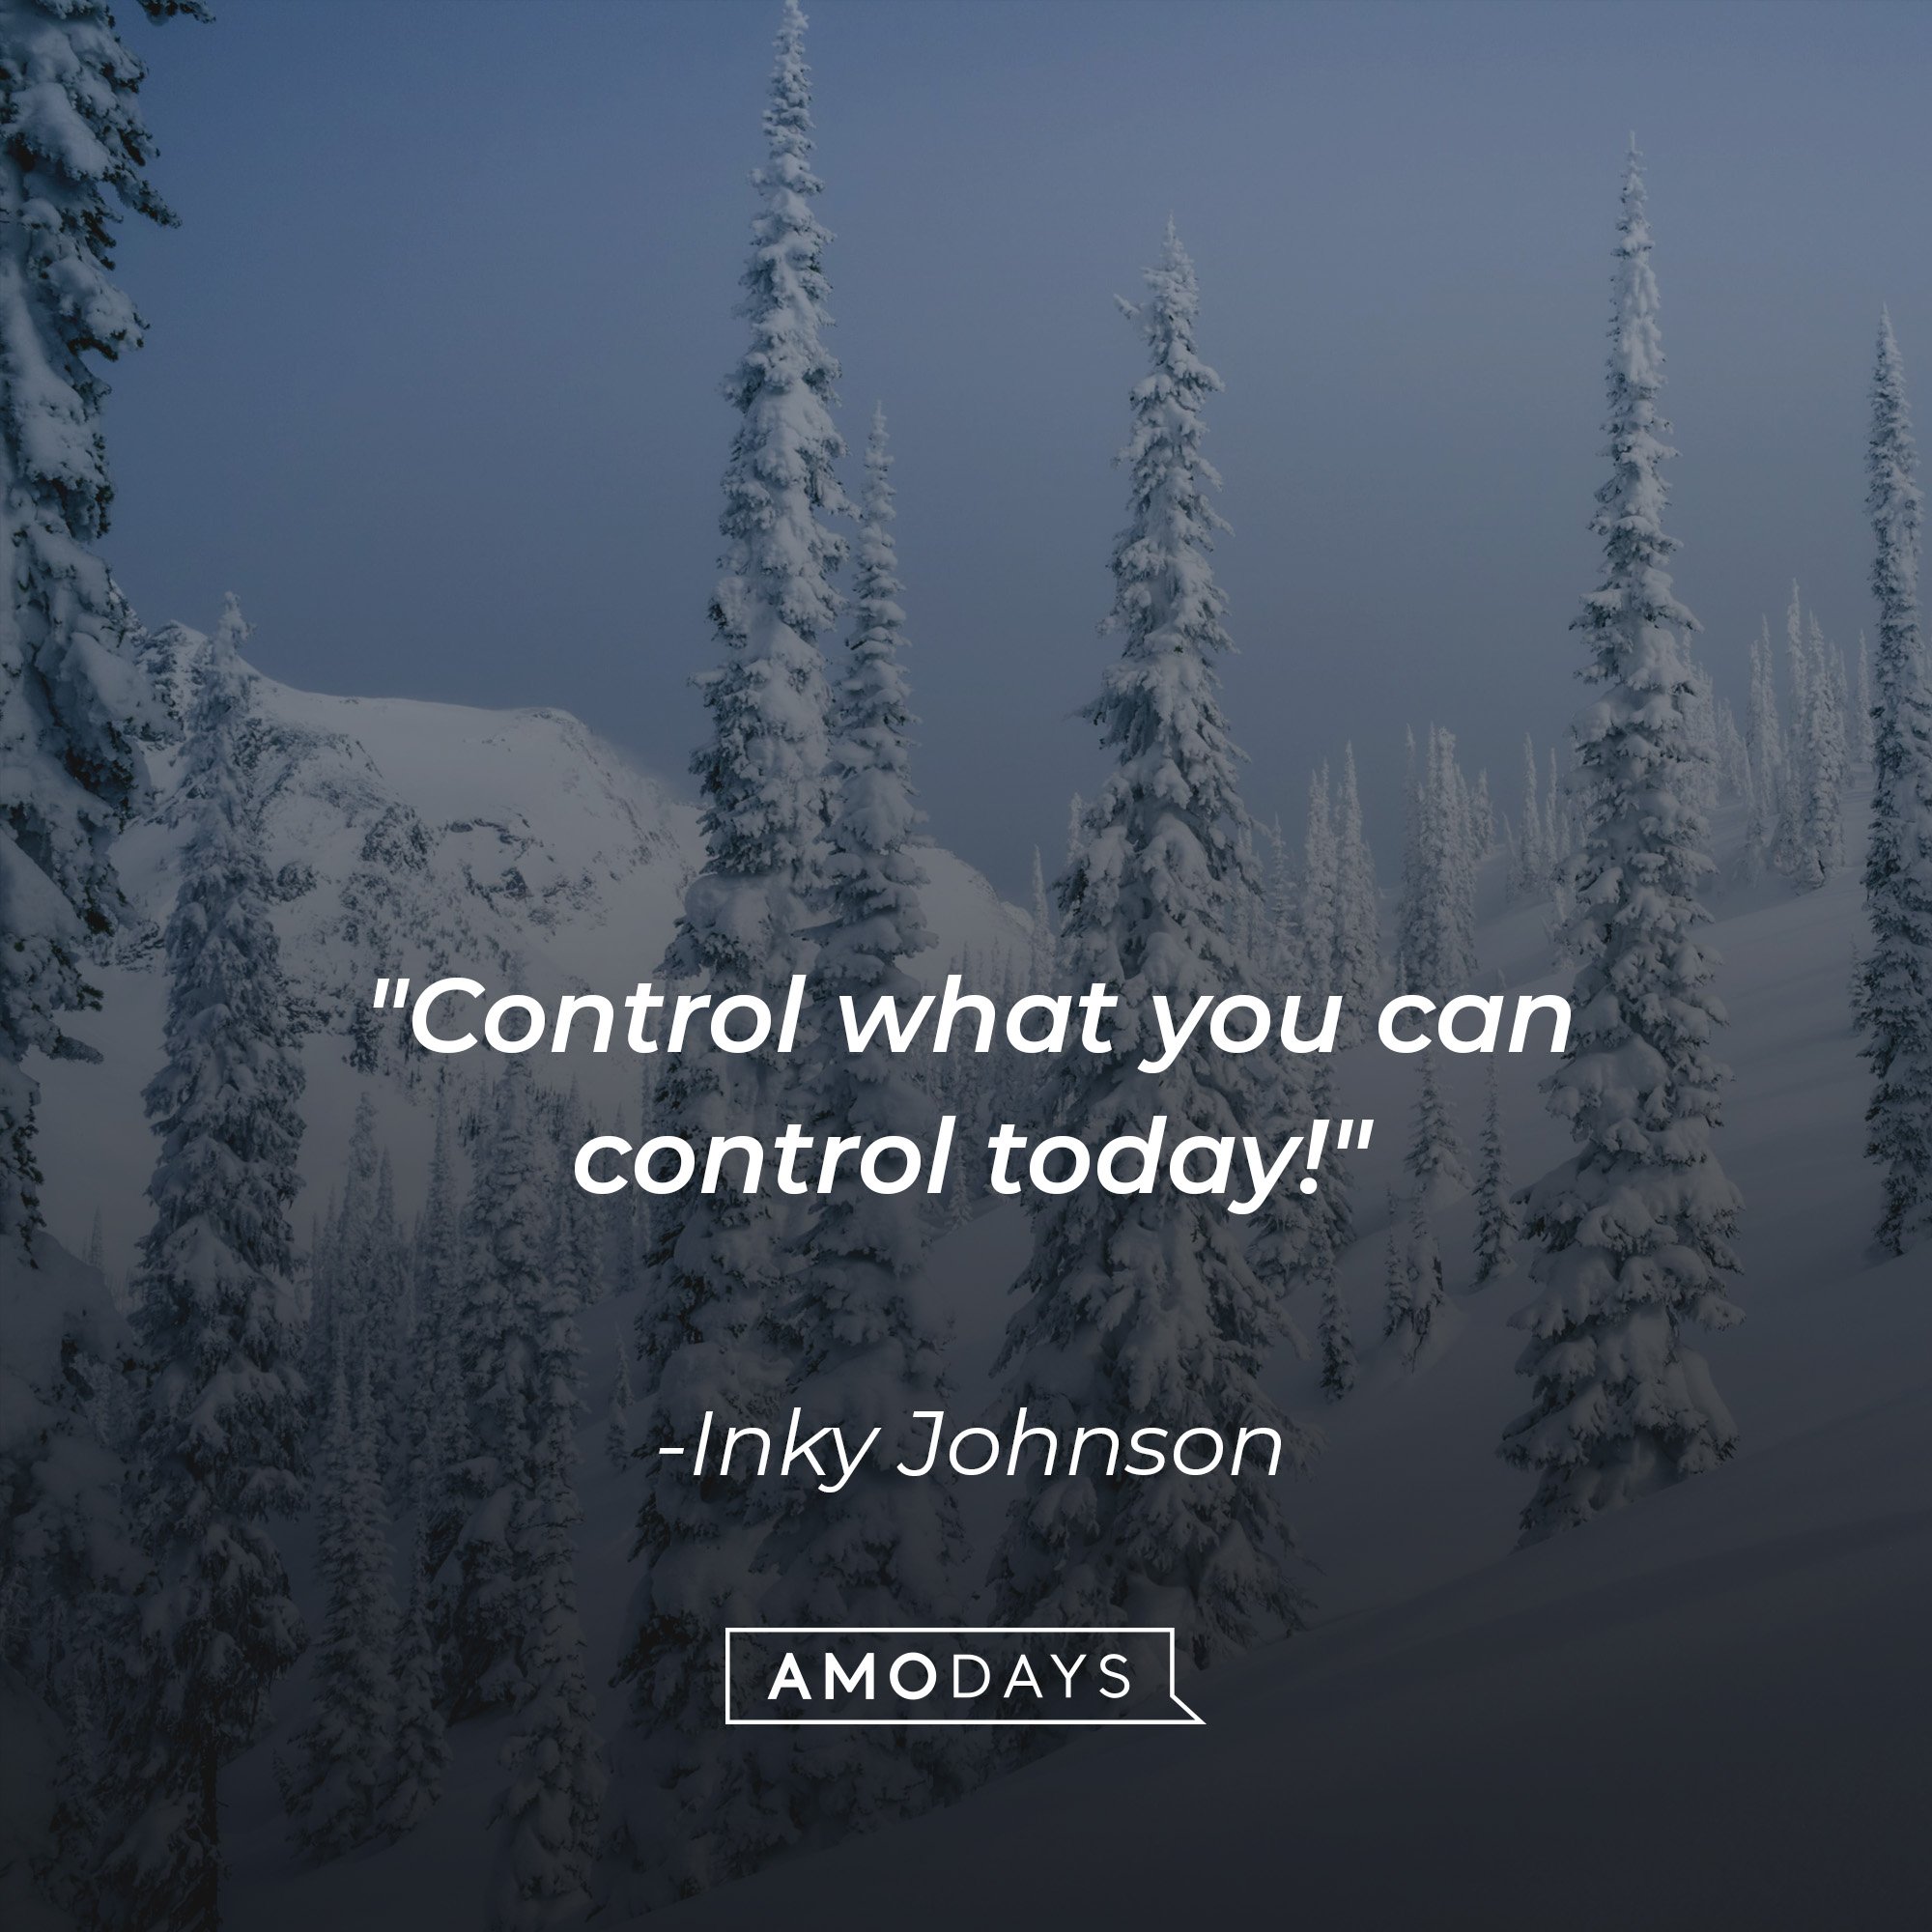 Inky Johnson's quote: "Control what you can control today!" | Image: AmoDays